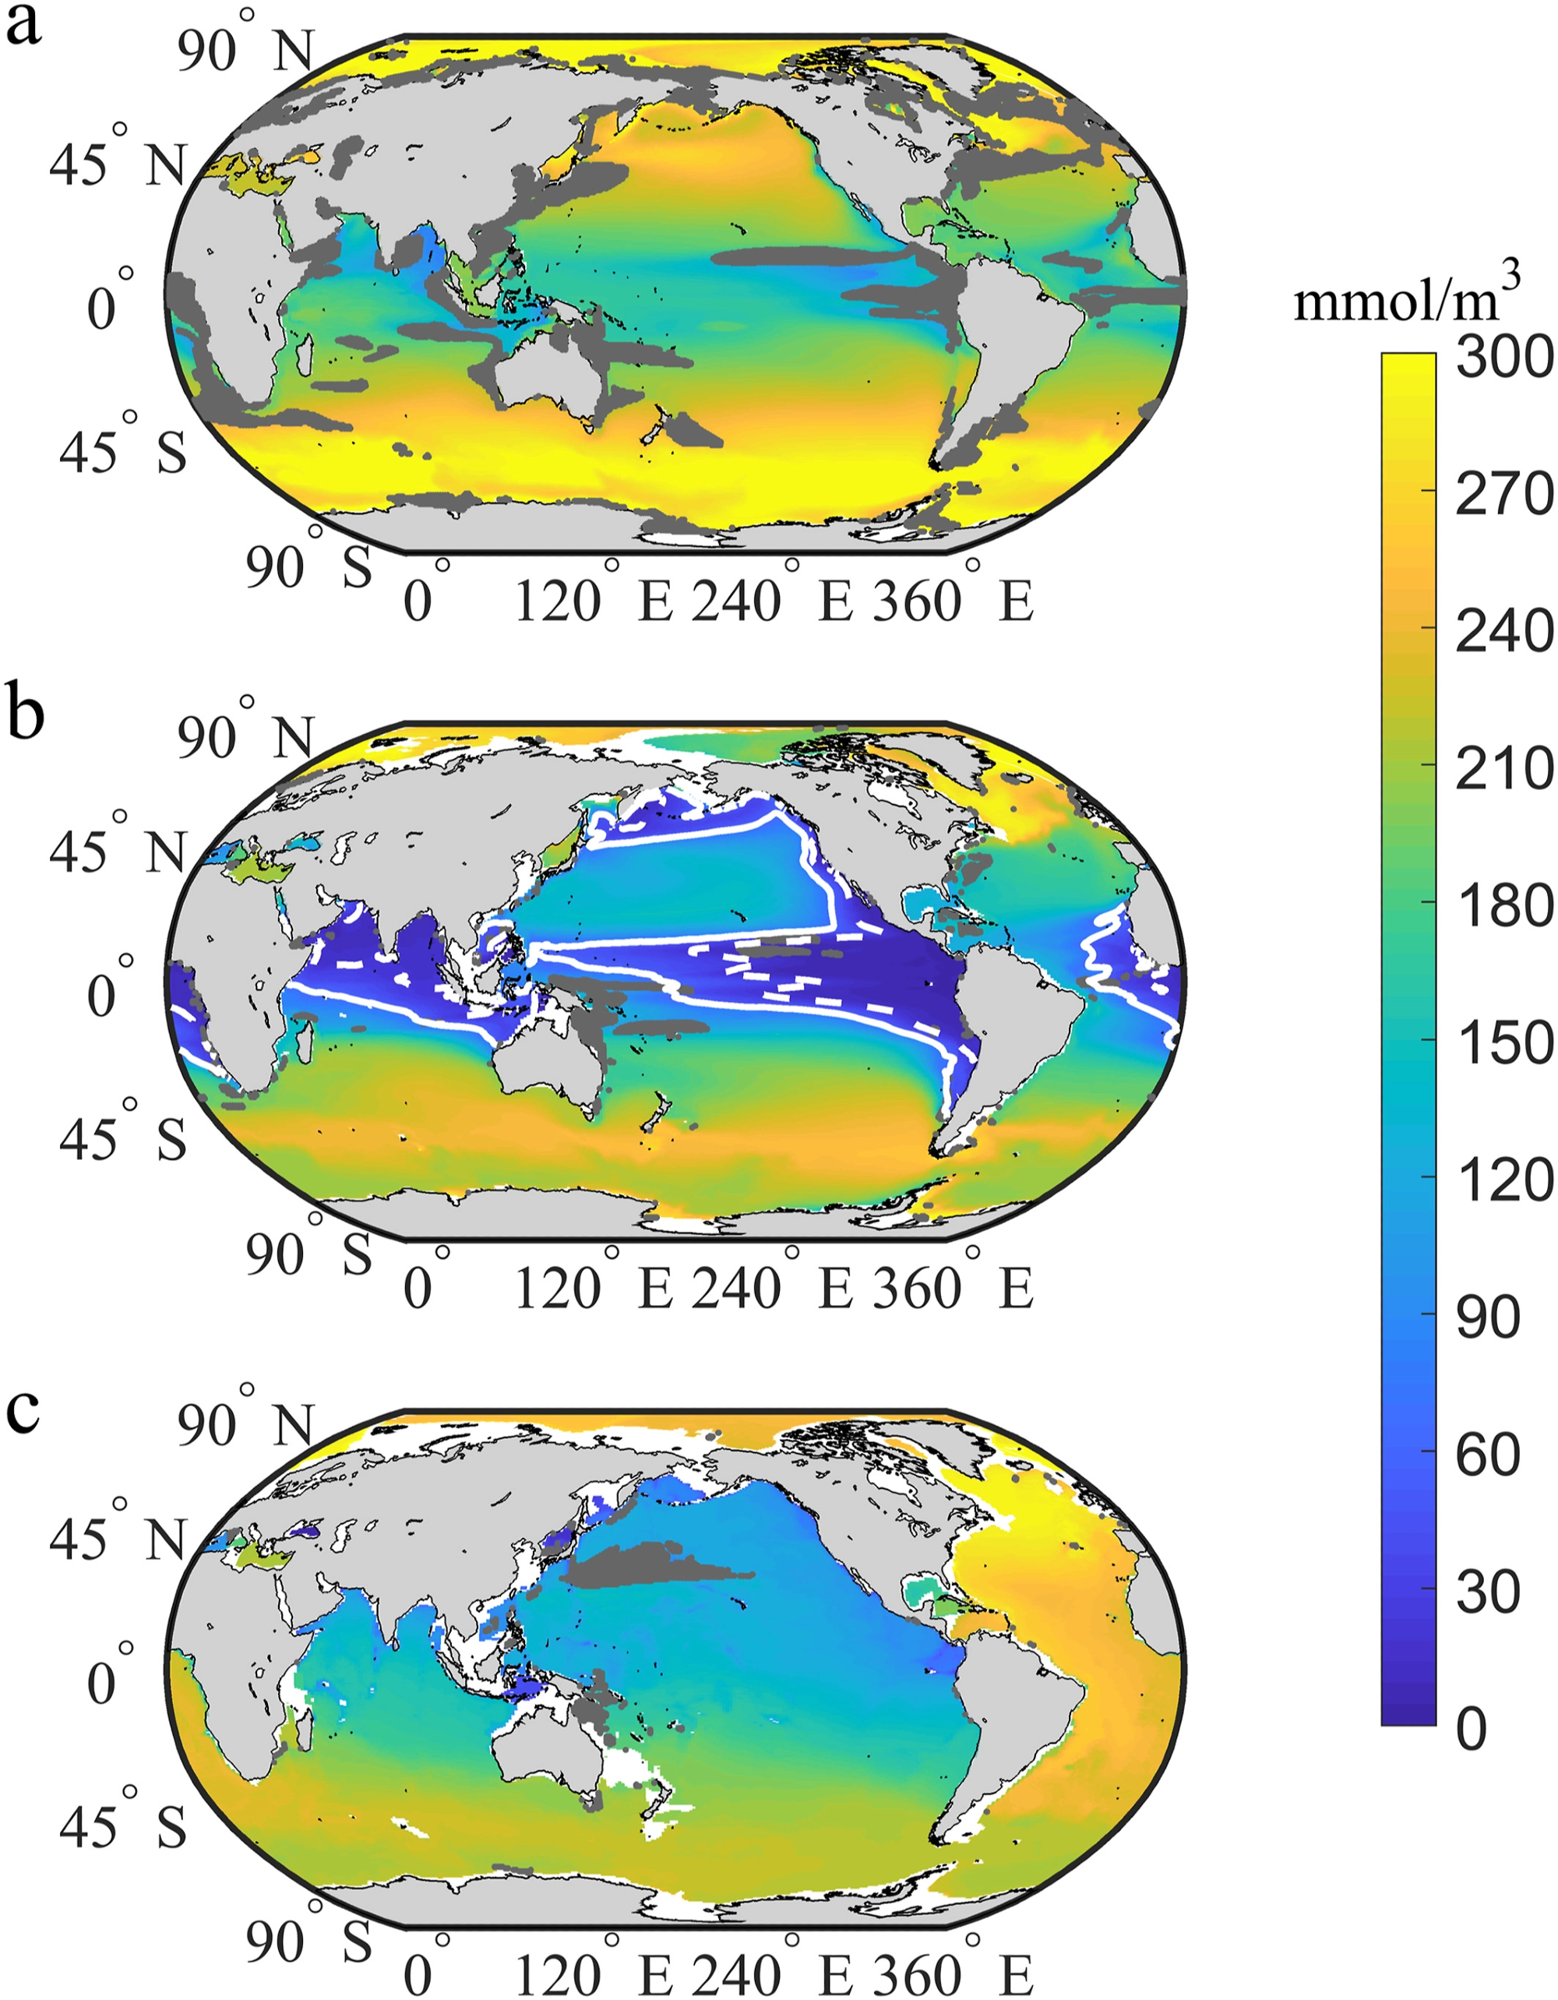 Distribution of oxygen concentrations at time of emergence (O2ToE) in the (a) epipelagic, (b) mesopelagic, and (c) bathypelagic zones under the RCP8.5 scenario. The white solid and dashed lines represent the oxygen concentrations of 20 and 60 mmol/m3, respectively. Dark gray indicates no emergence of deoxygenation by 2080.